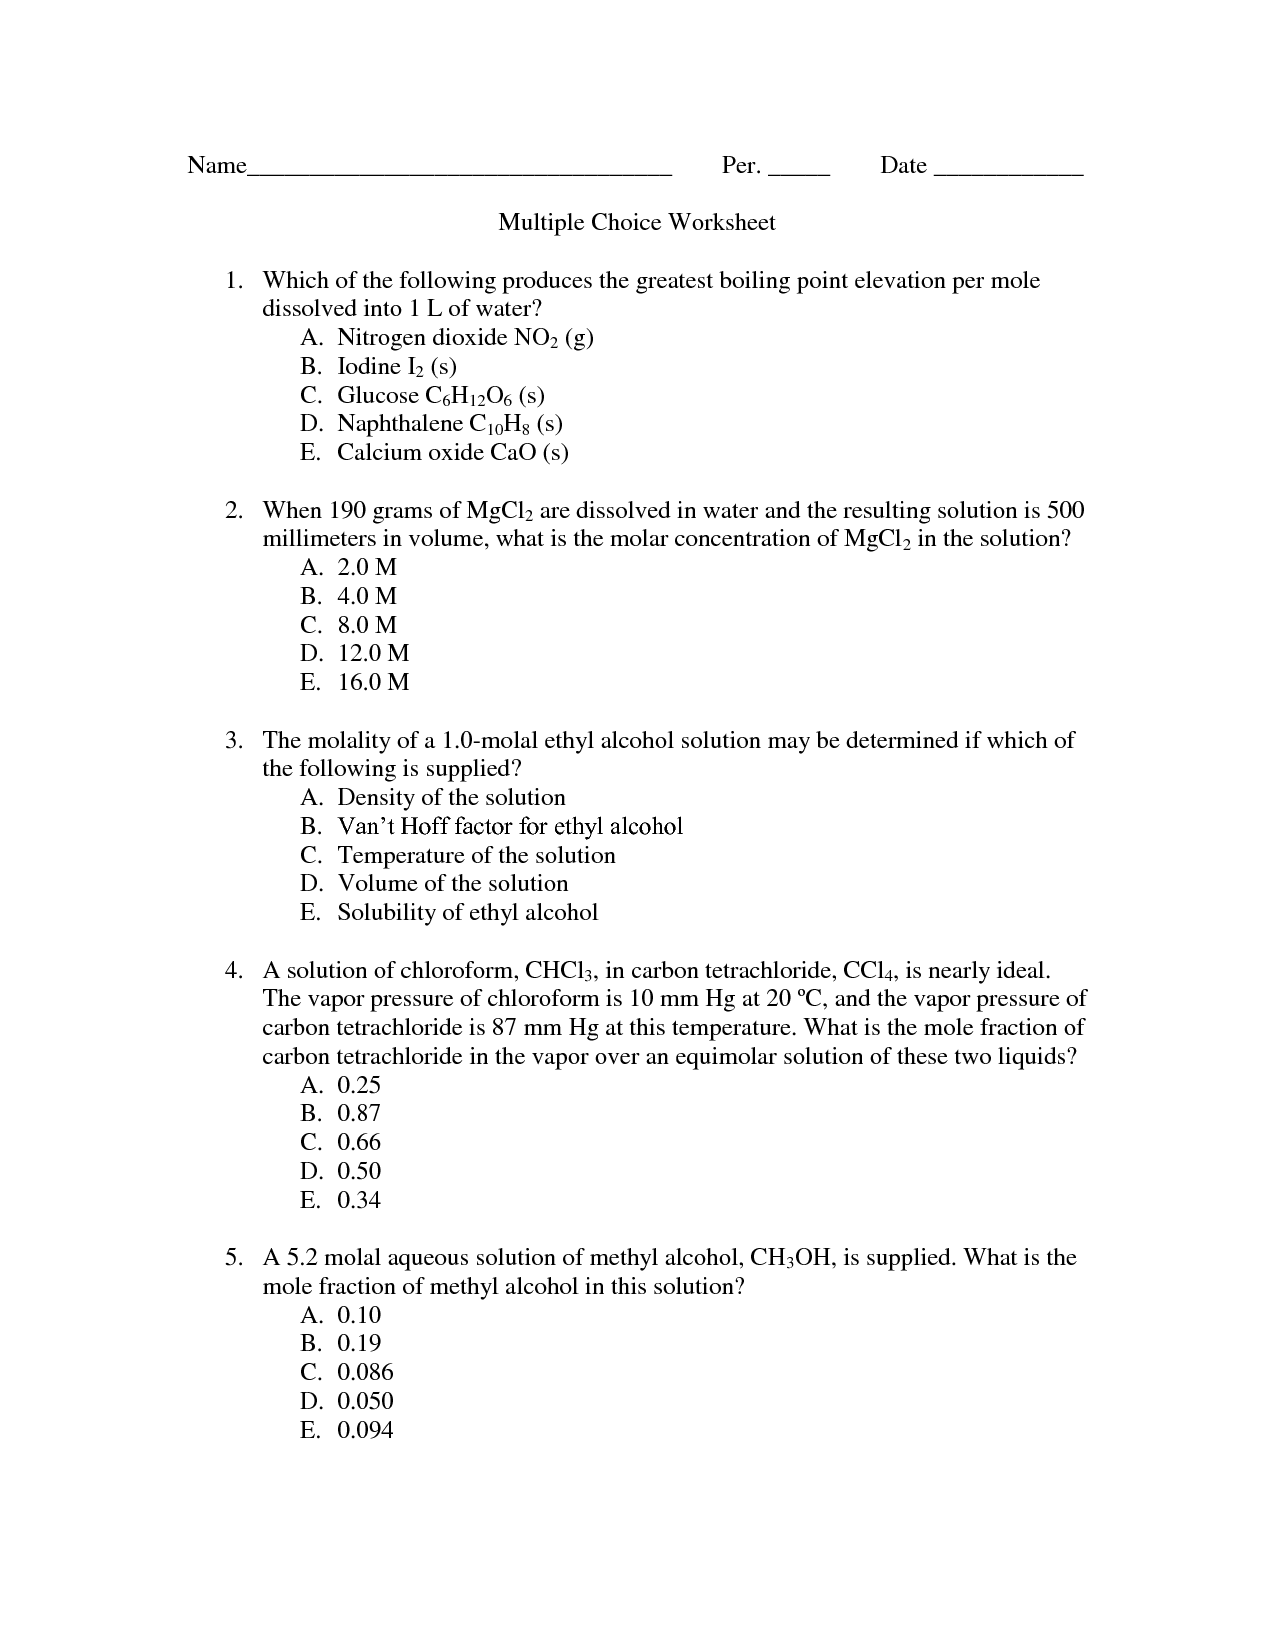 Multiple Choice Worksheets